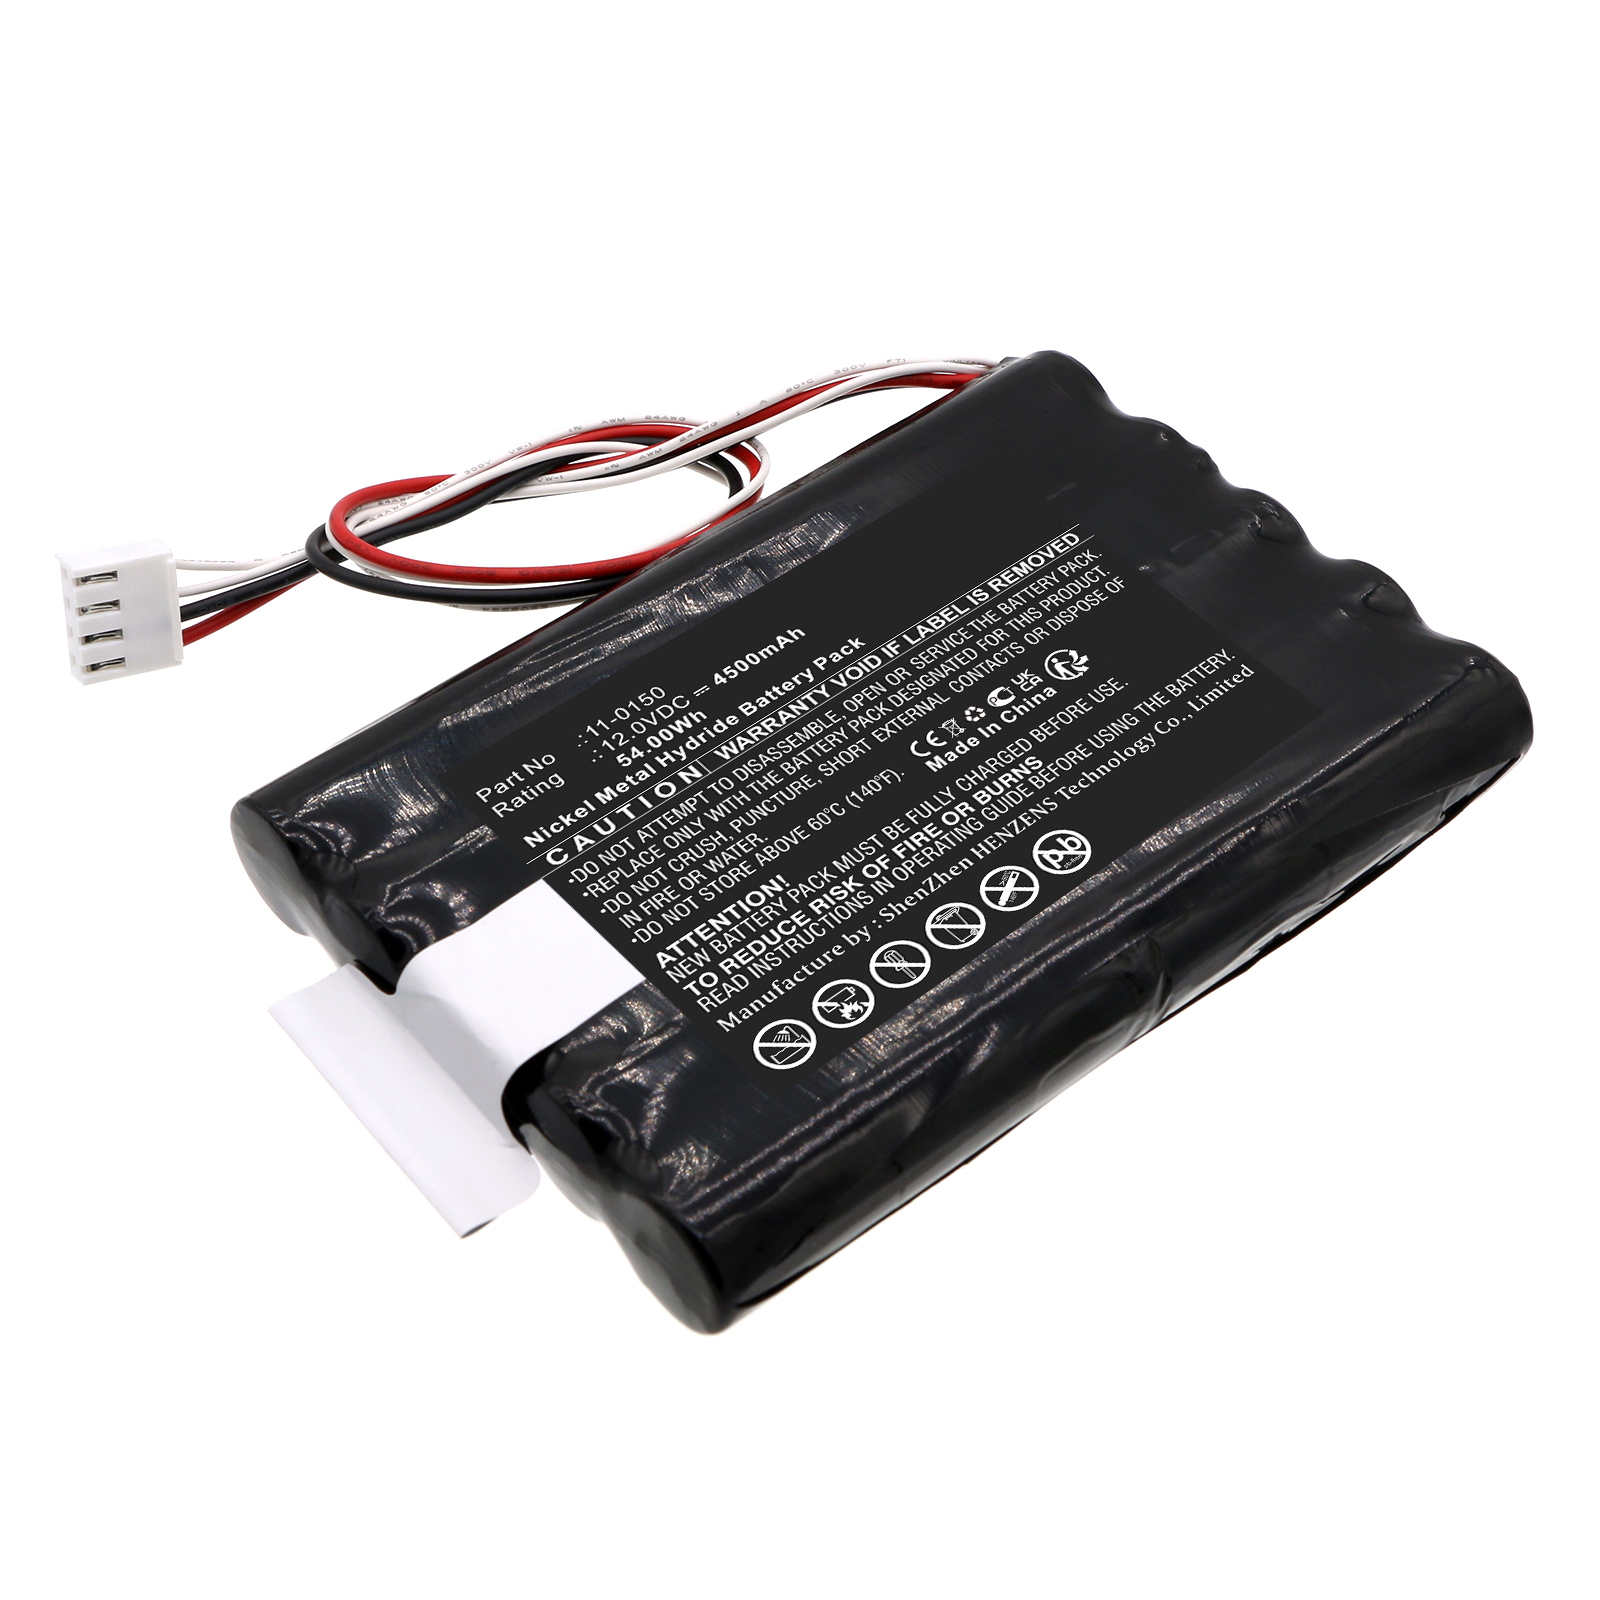 Synergy Digital Medical Battery, Compatible with SAM E.P.S 11-0150 Medical Battery (Ni-MH, 12V, 4500mAh)